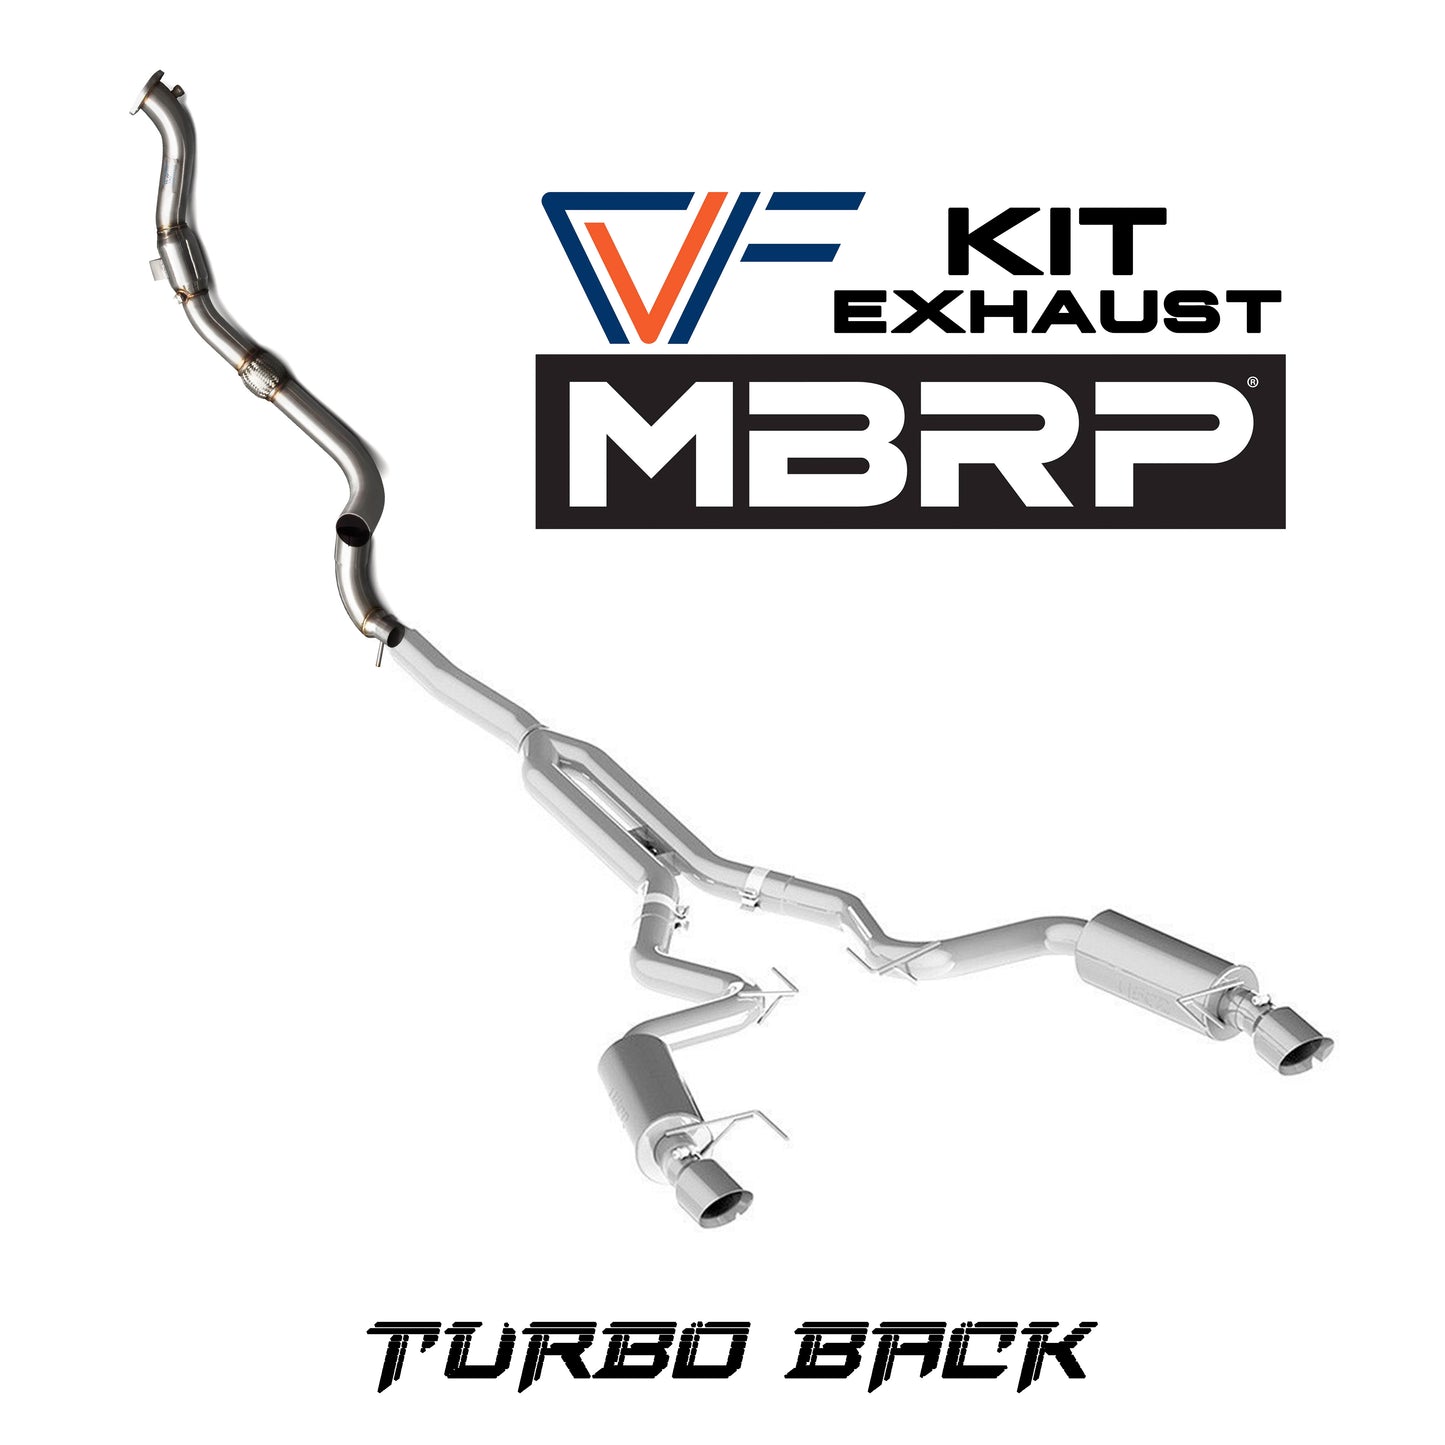 PP Turbo Back Exhaust Kit for 15-23 EcoBoost Mustang (CVF- MBRP)